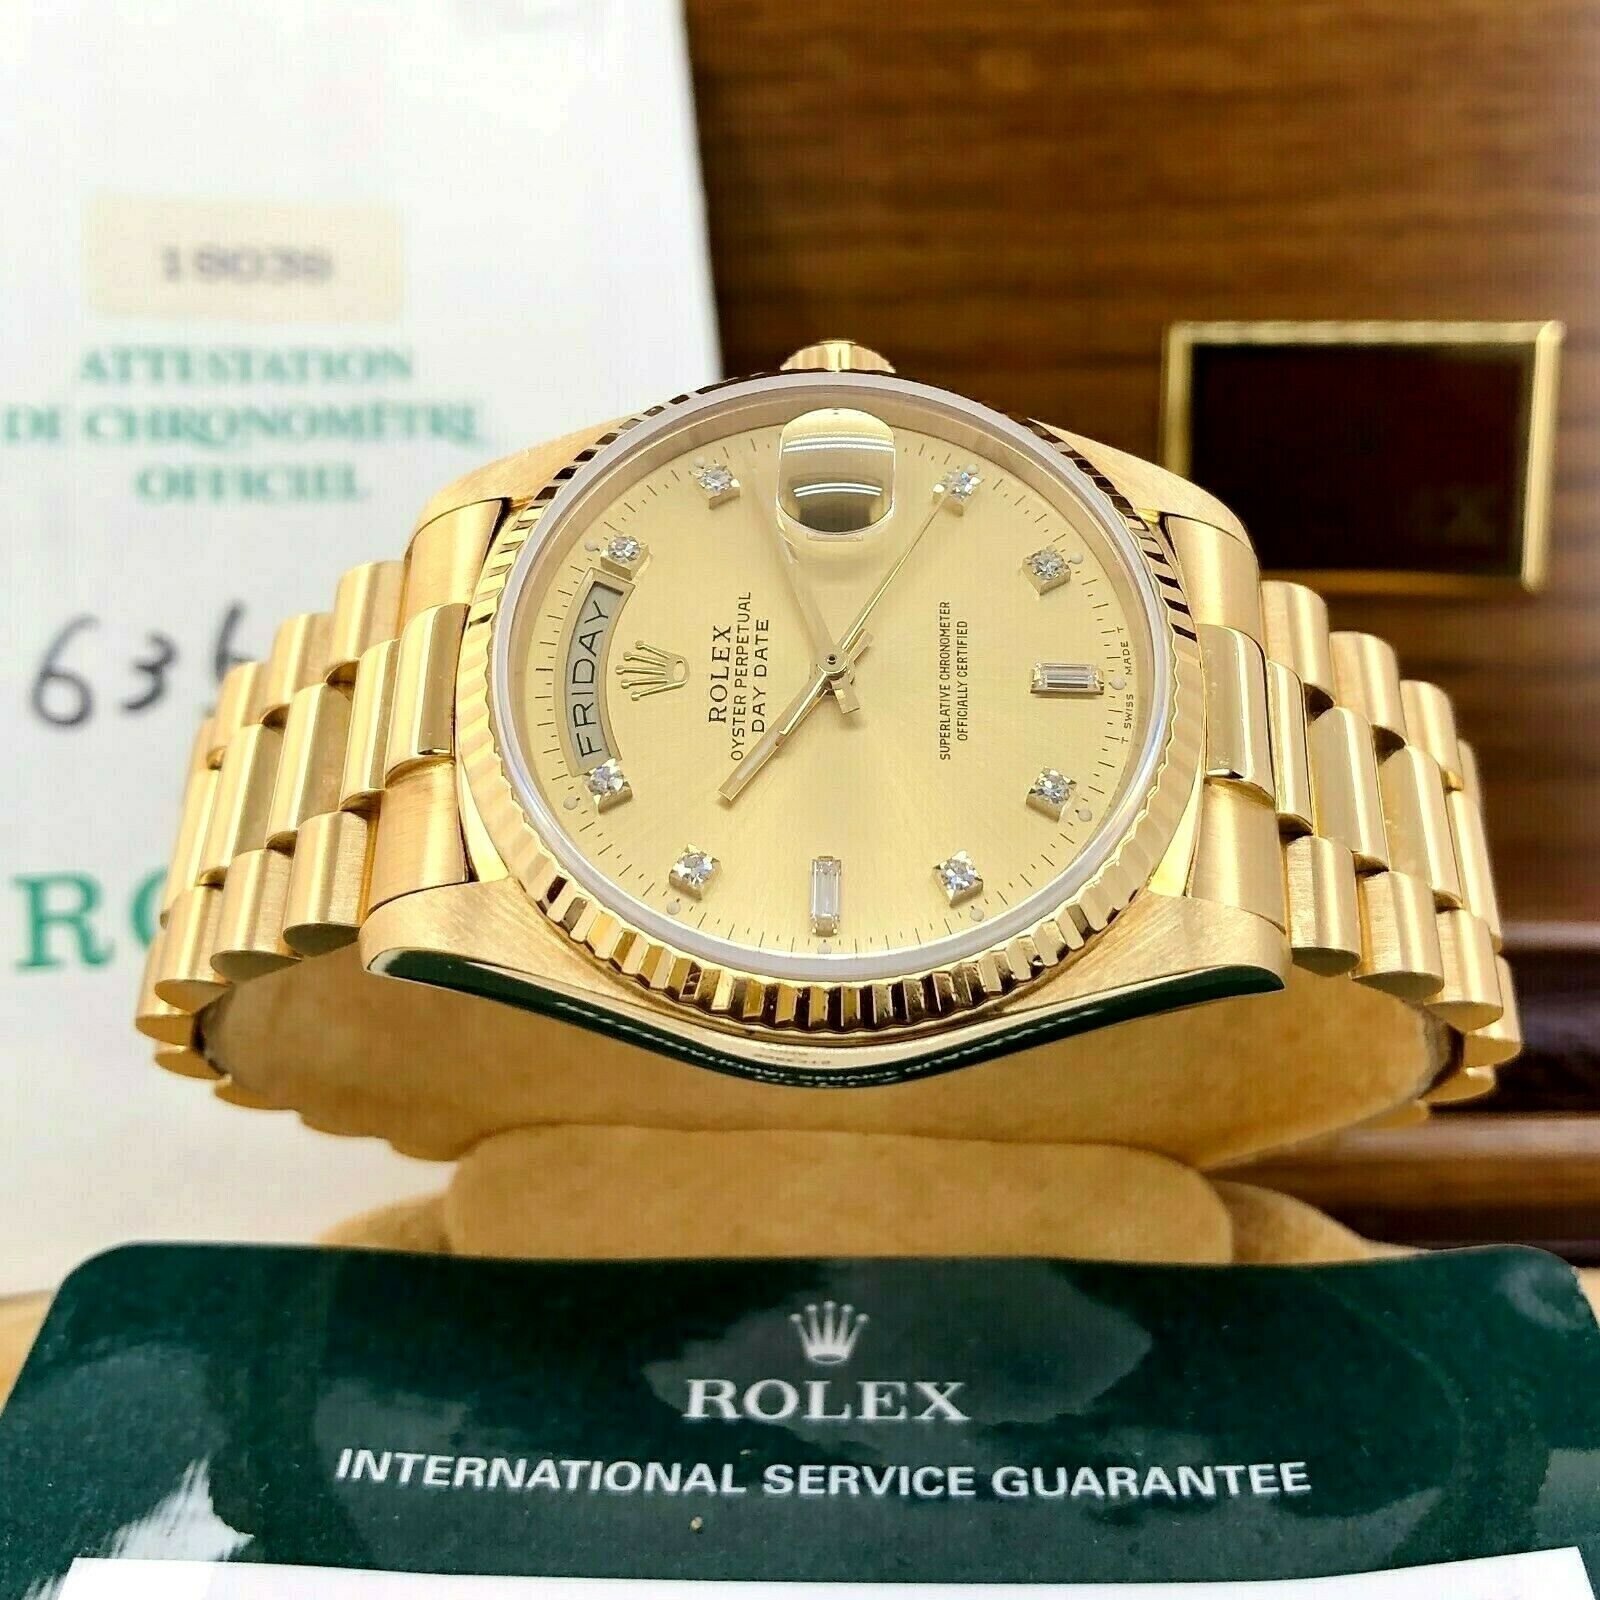 Rolex Day Date President 18K Yellow Gold 36mm Watch 18038 Factory Diamond Dial